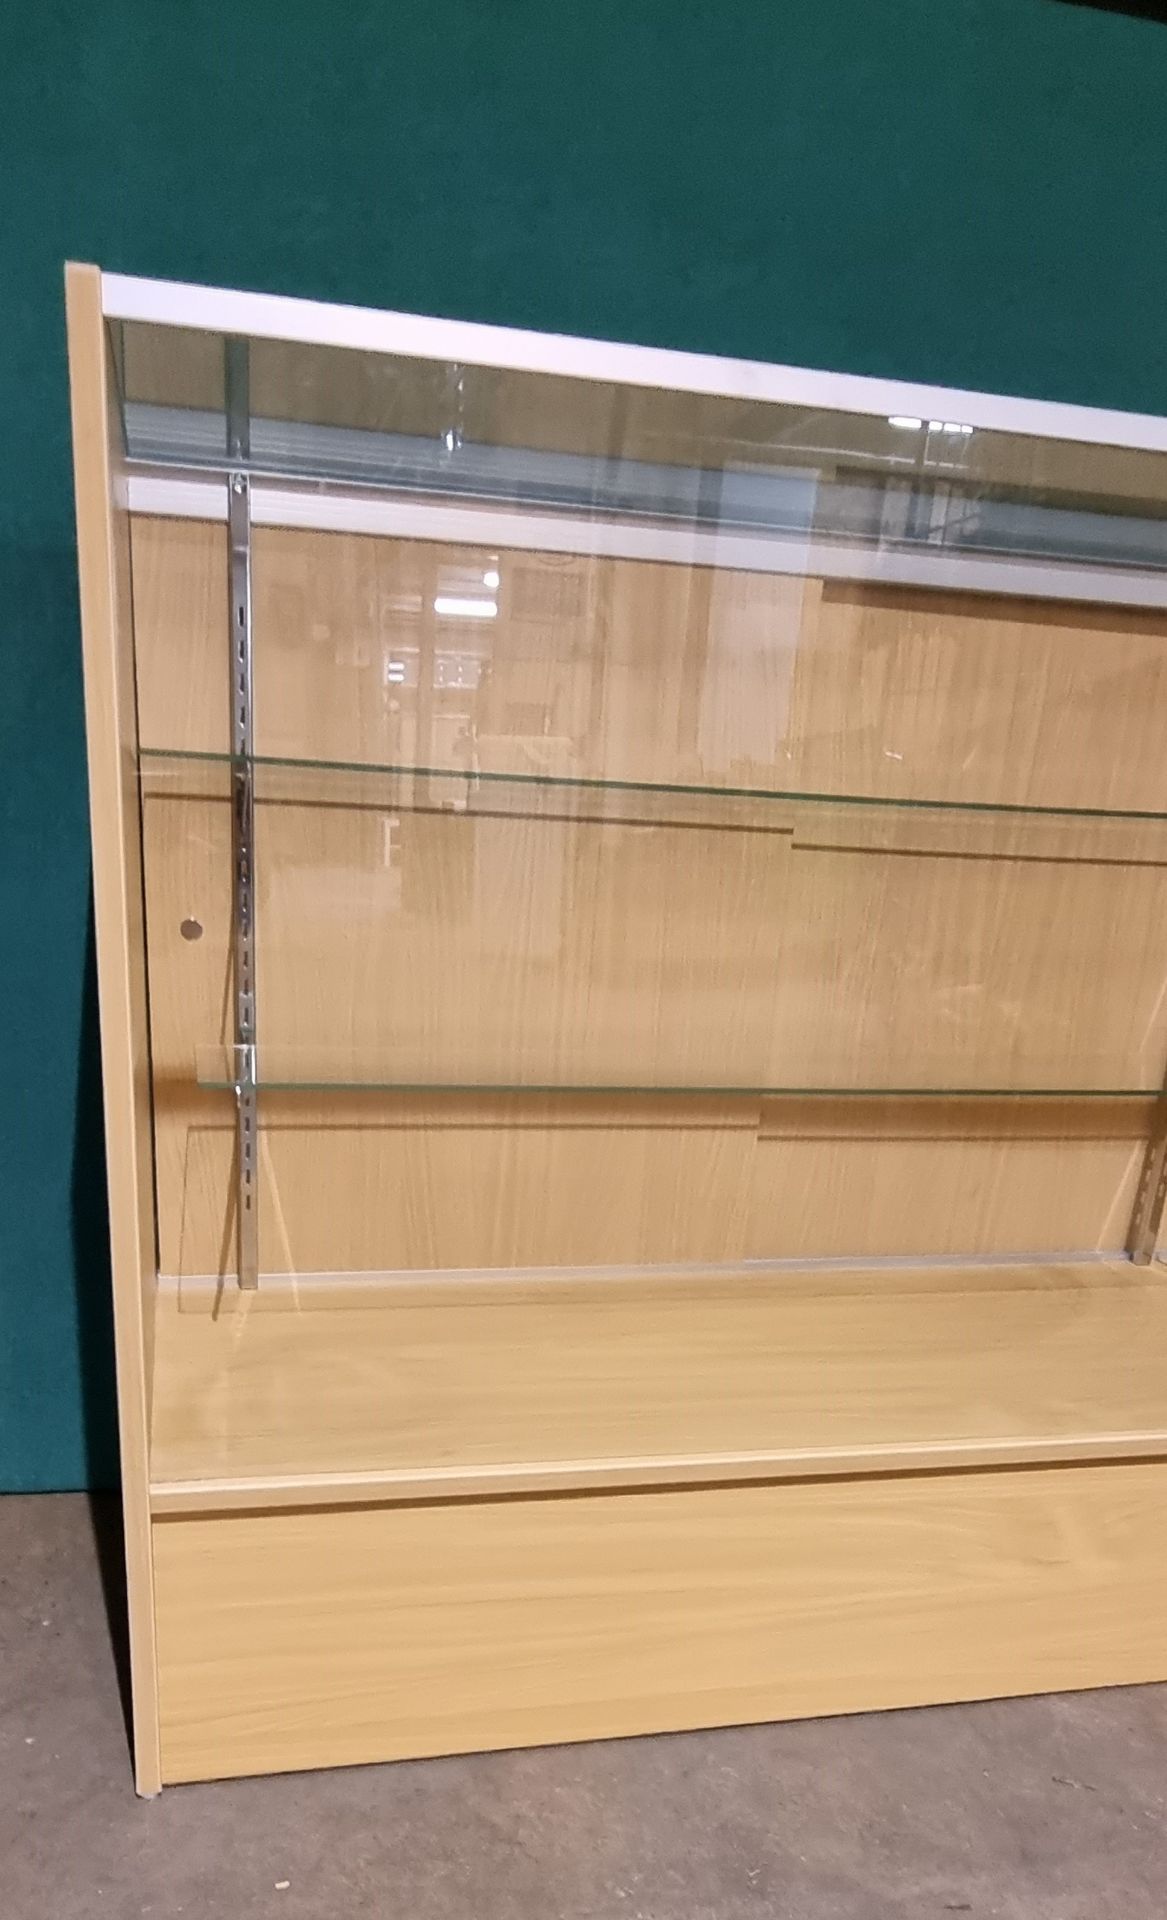 2 x Beech Display Cabinets With 2 Glass Shelves 1220mm x 460mm x 975mm - Image 2 of 6